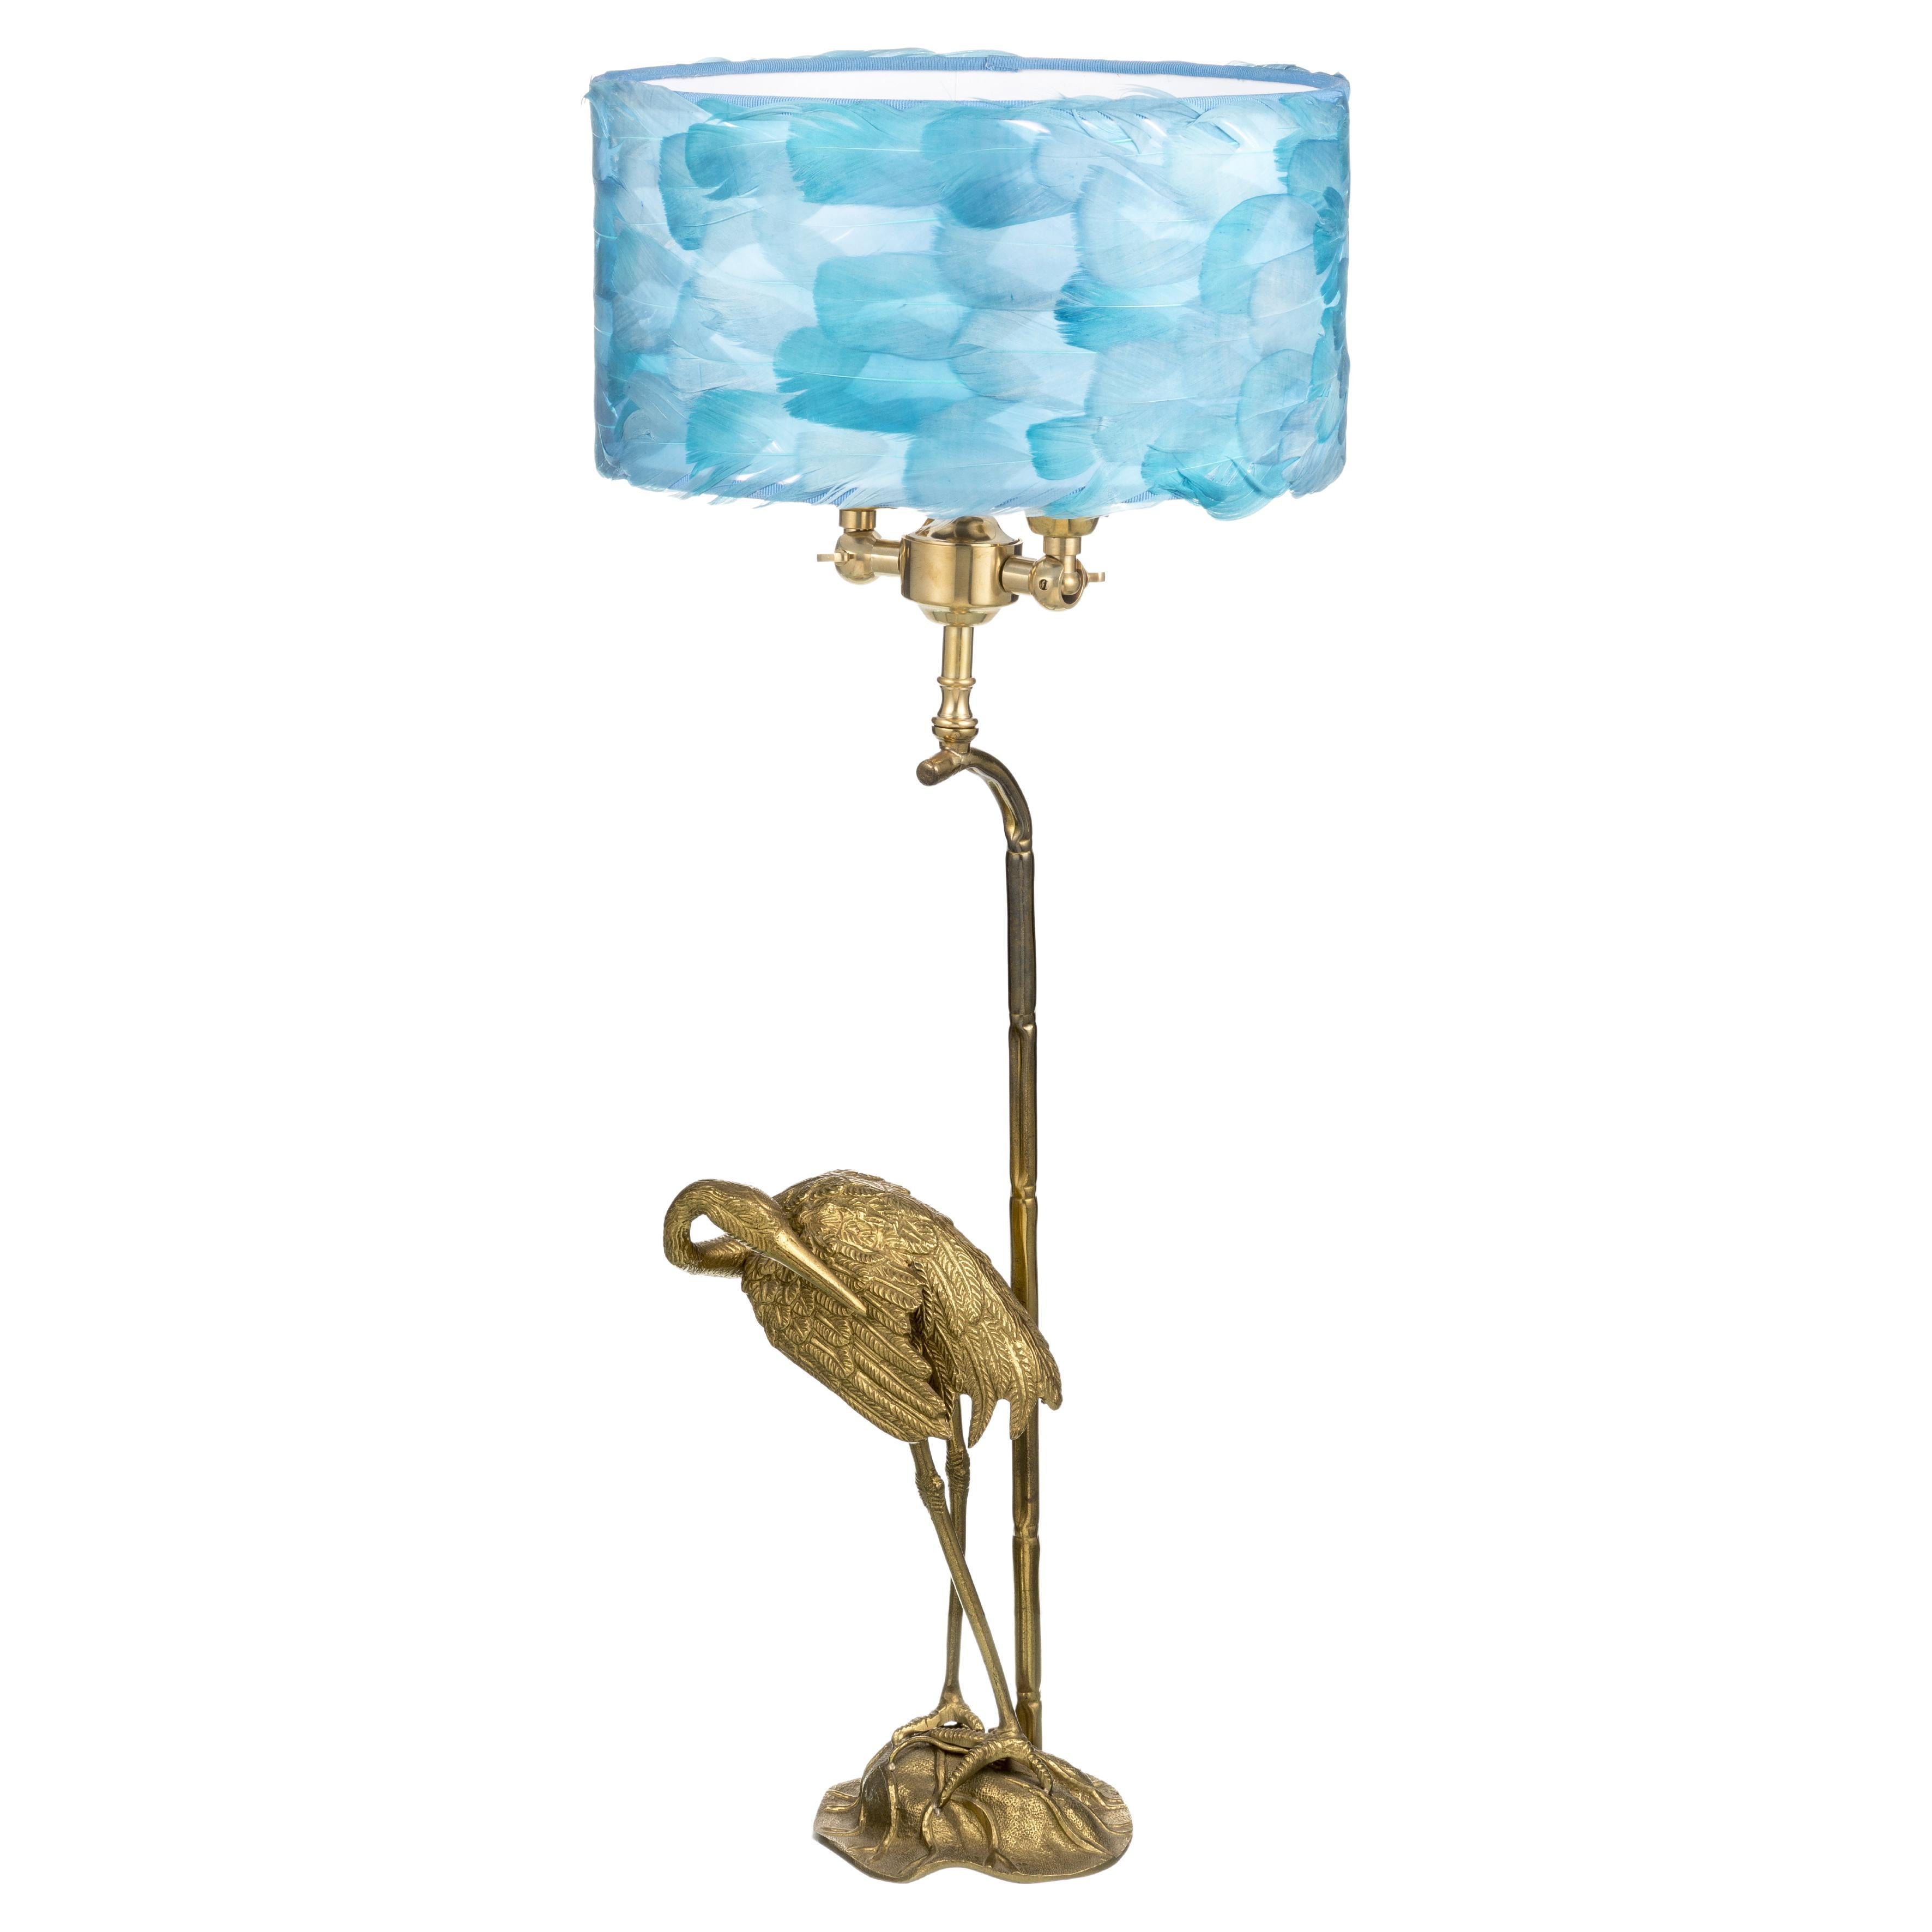 Fauna light blue feathers ibis lampshade table lamp For Sale